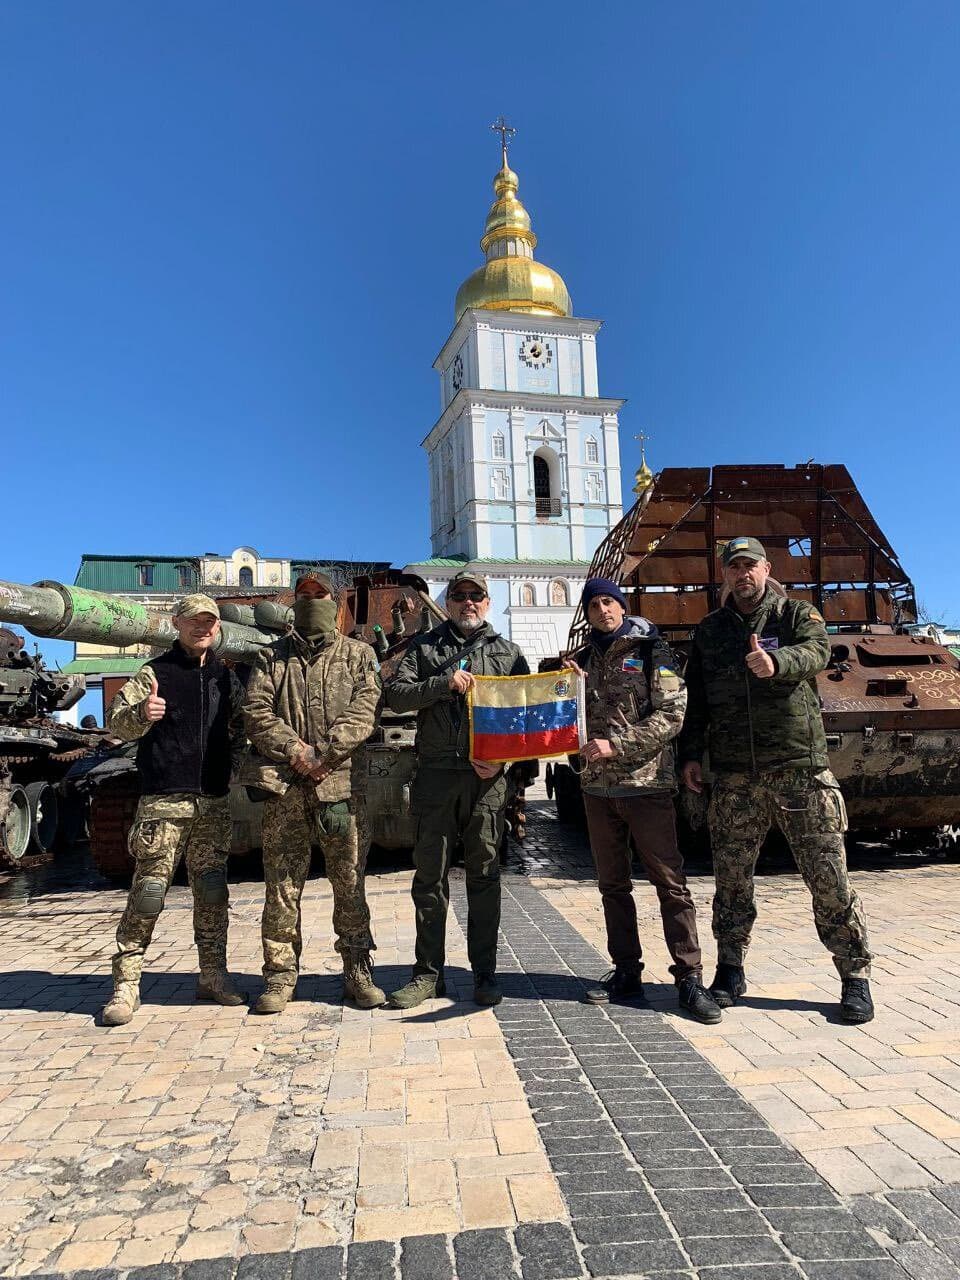 Five men in uniform belonging to the pro-Ukrainian volunteer unit Batallon Bolivar pose with a Venezuelan flag in front of burnt-out Russian armoured vehicles.